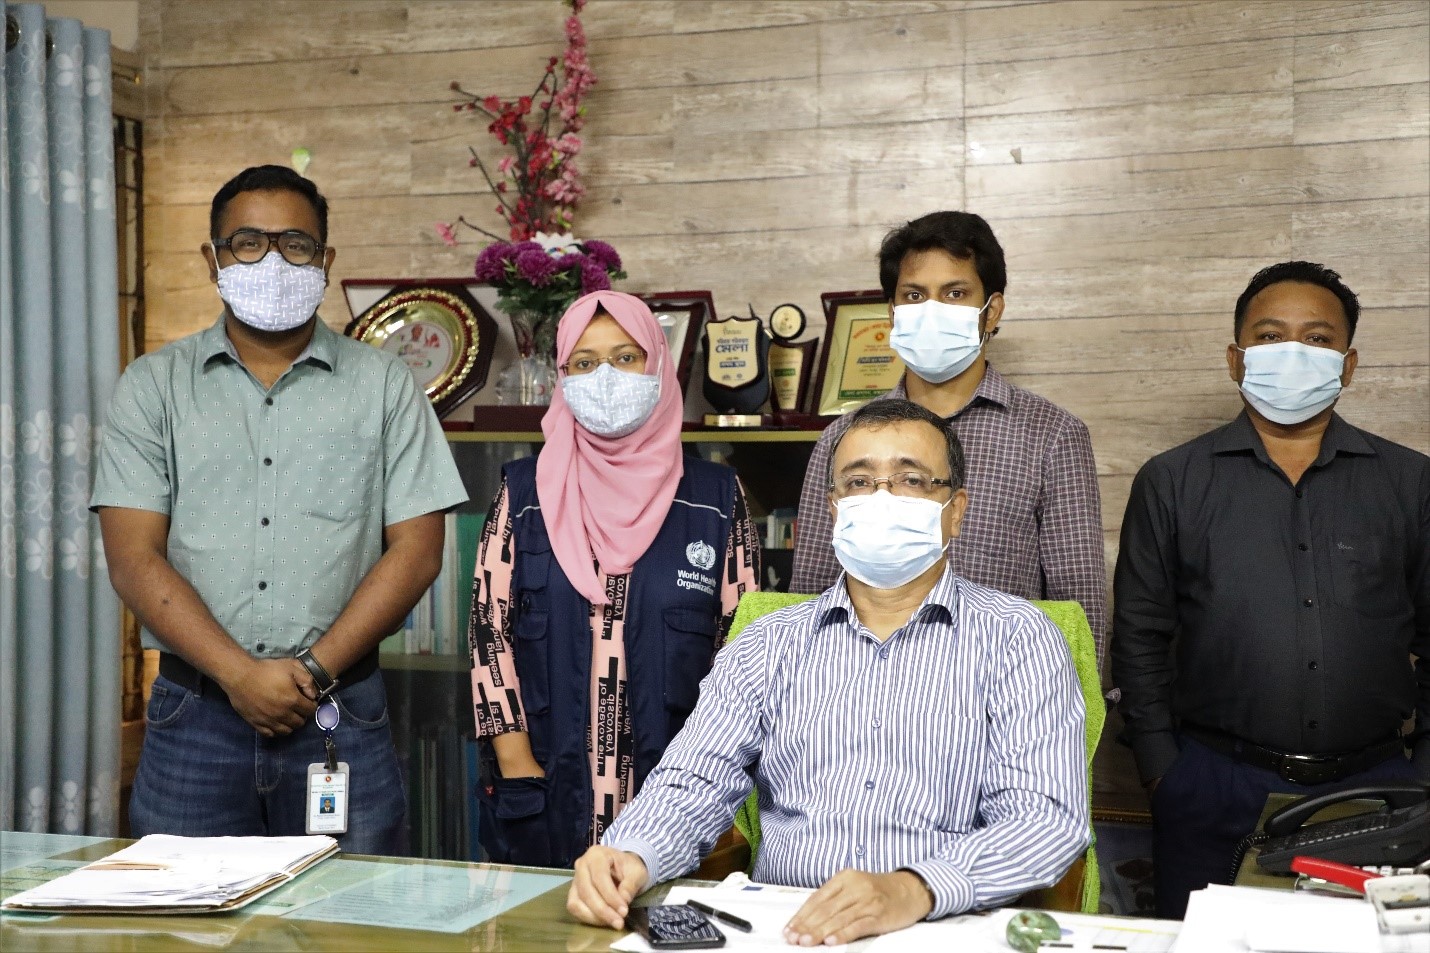 Cox's Bazar Civil Surgeon, Dr. Md Mahbubur Rahman, and the team from the Health Emergency Operations Center/Control Room, which includes Dr. Rishad Choudhury Robin, a Public Health Officer from MoHFW Coordination Cell; Dr. Umme Asma Absari, a WHO Technical Support Officer; and Dr. Shownam Barua, ISCG/ Syed Tafhim.